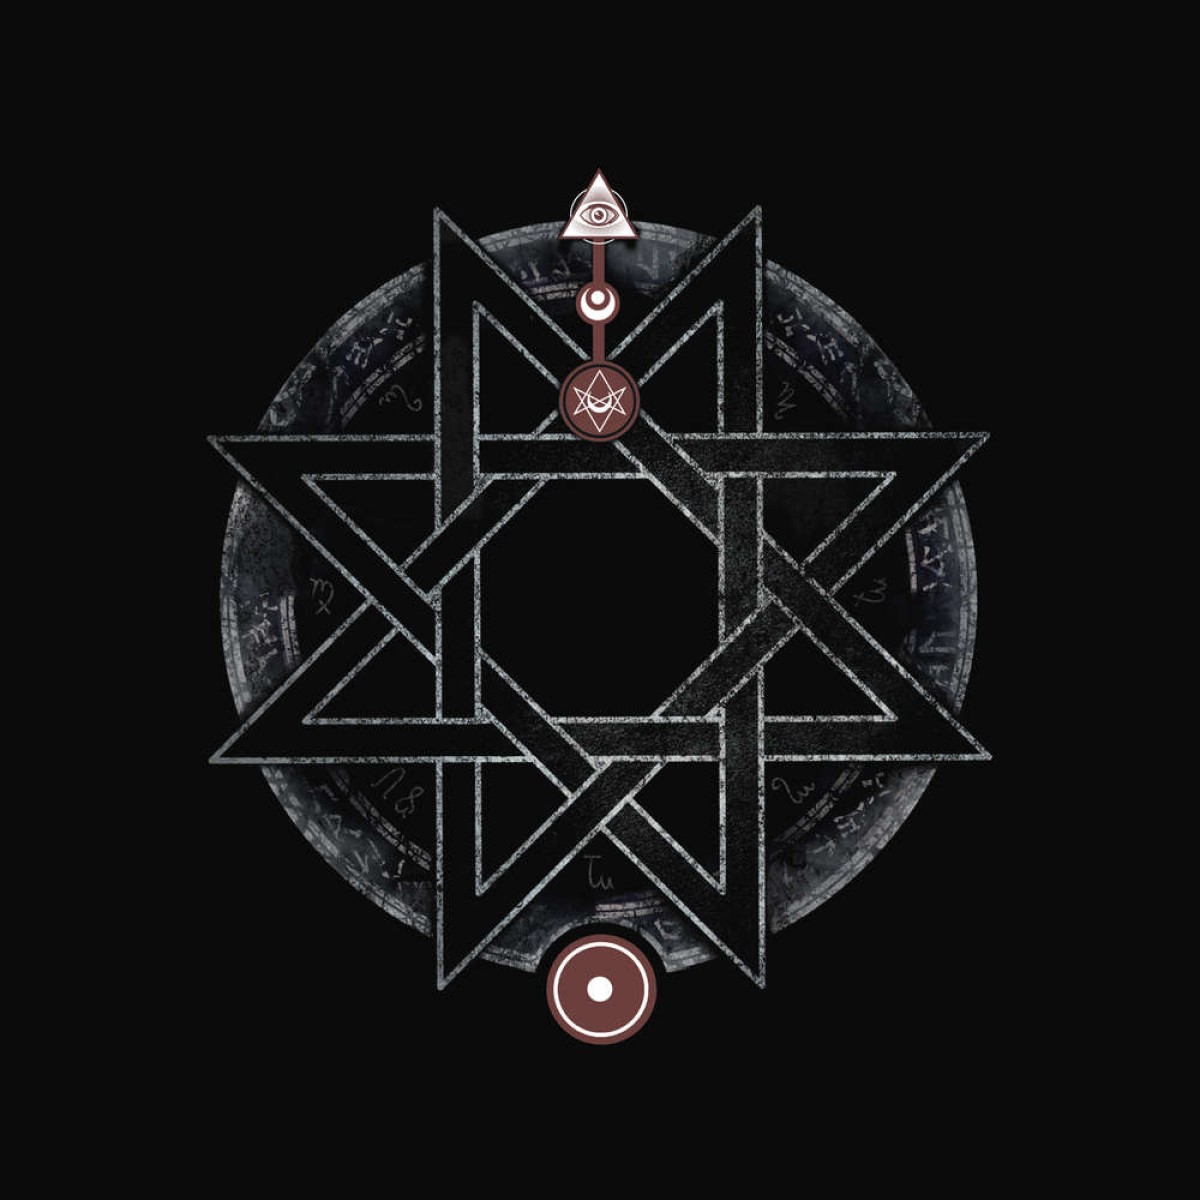 Merciful Nuns - Oneironauts (2024) - Review (by Tomaz)

Full review: terrarelicta.com/index.php/publ…

#terrarelicta #darkmusic #mercifulnuns #review #solarlodge #gothicrock #darkrock #germany